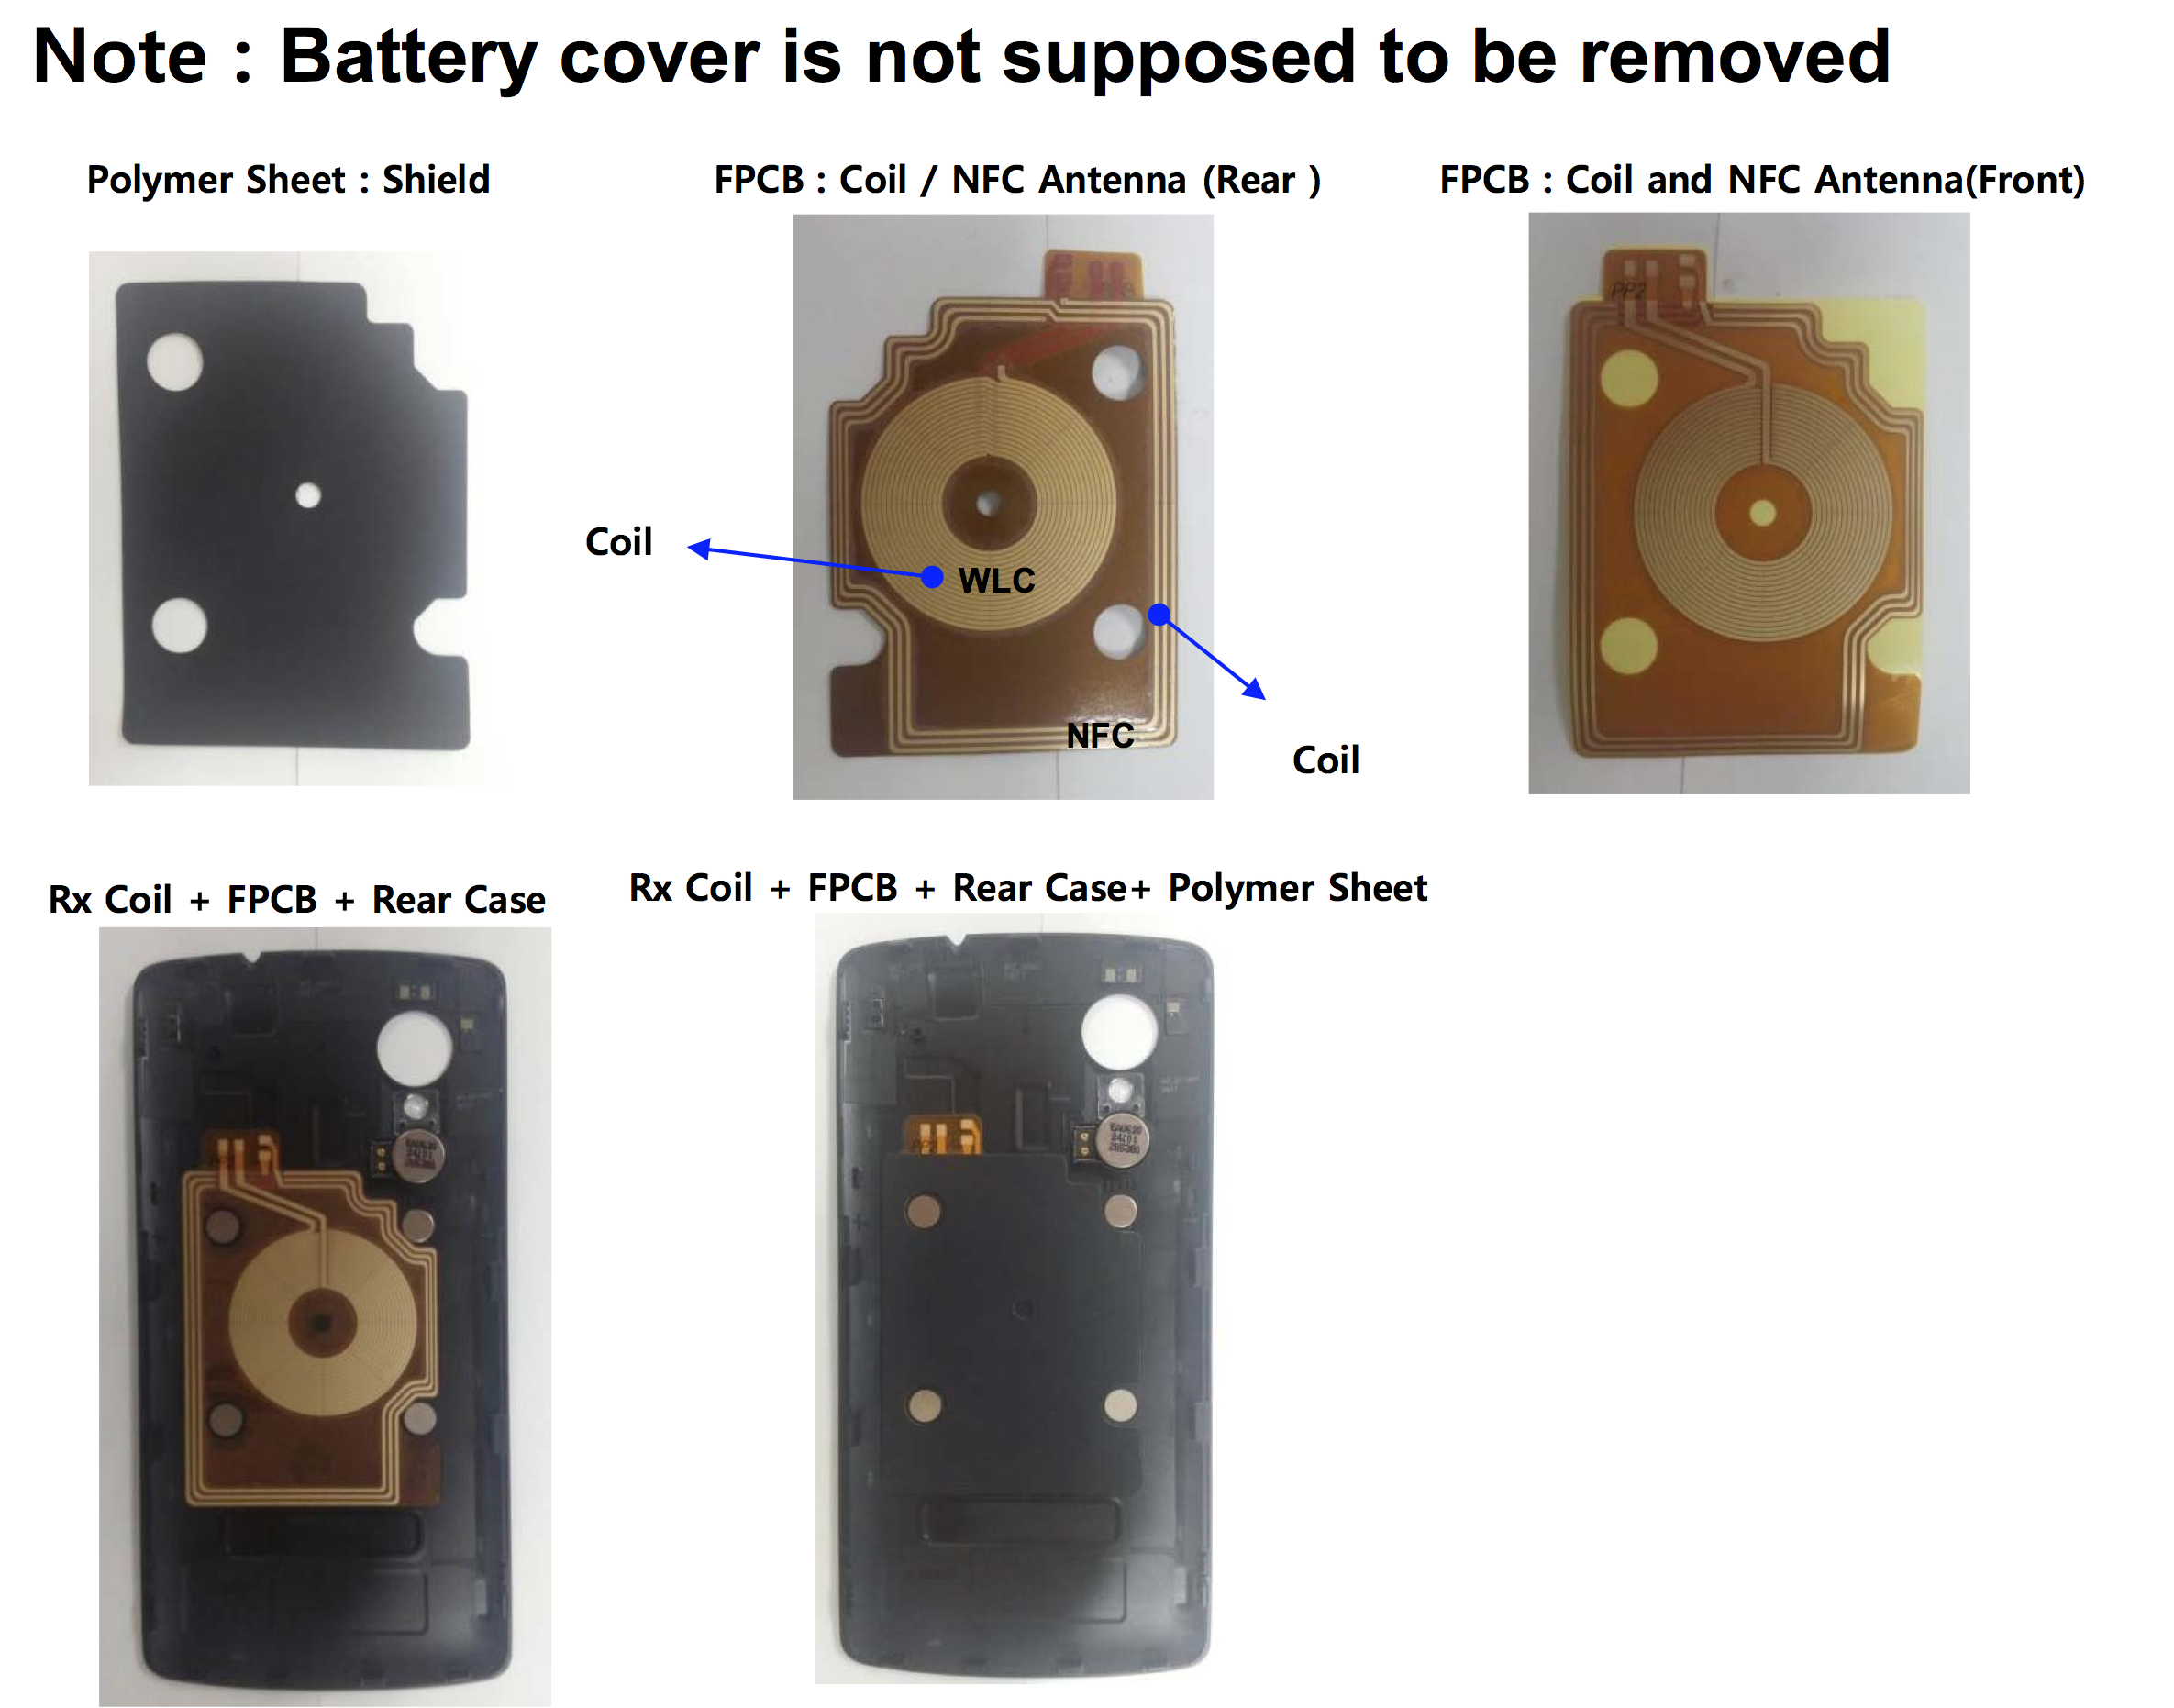 Potential Nexus 5 FCC Approval Reappears - LG-D820 (Update